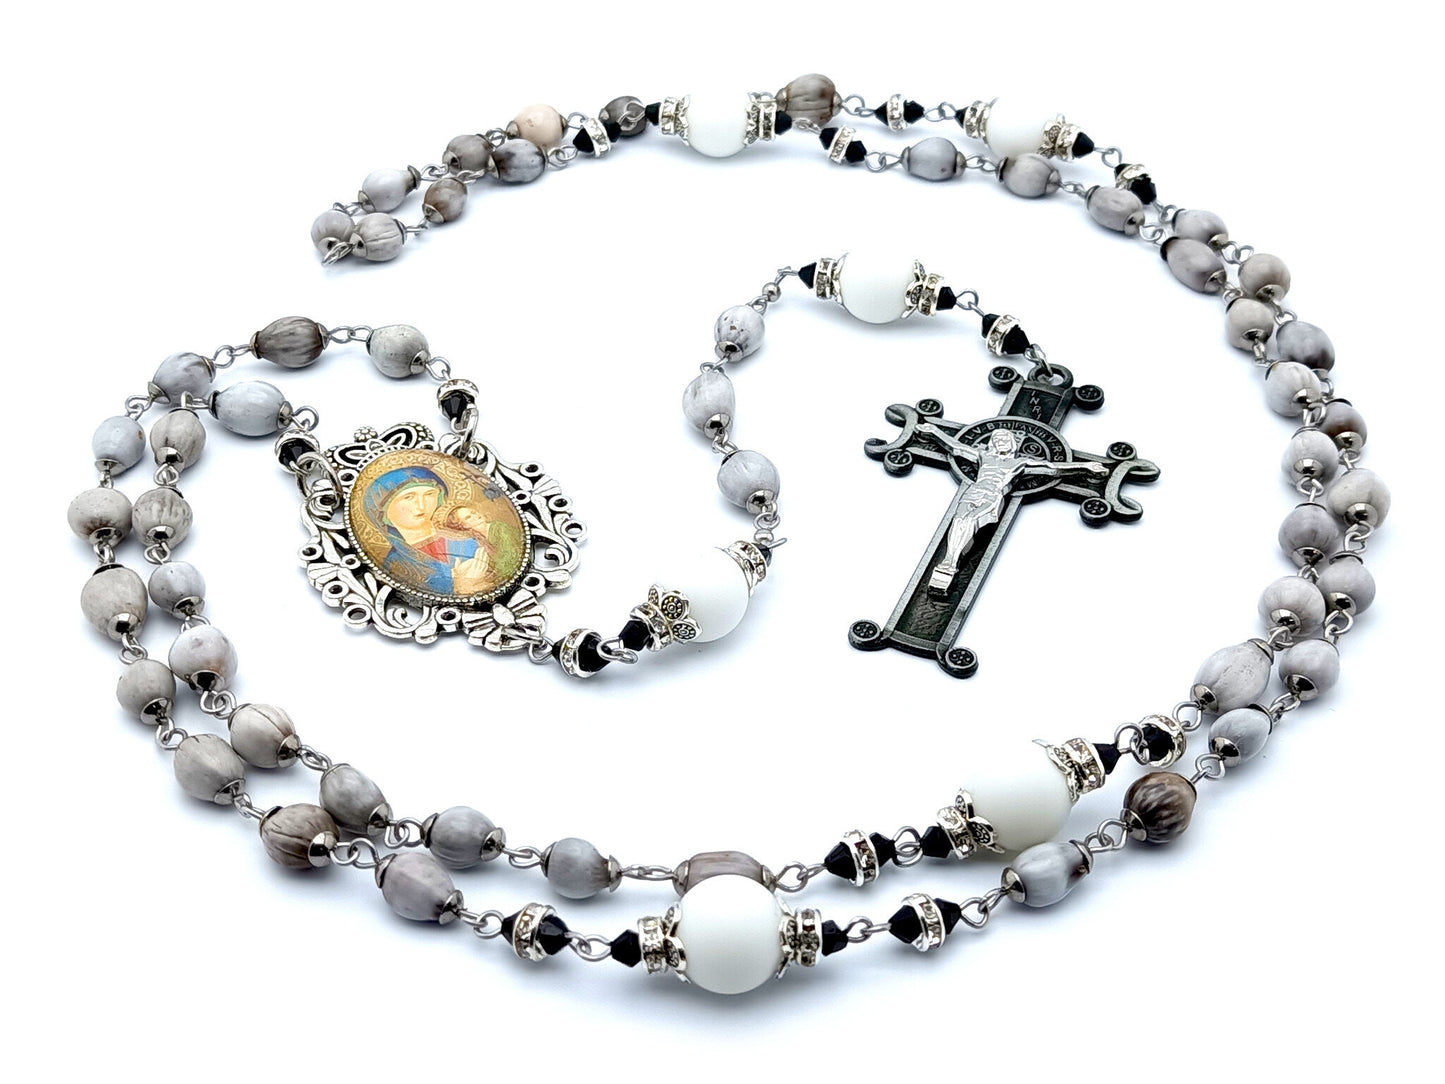 Our Lady of Perpetual Help unique rosary beads with Jobs Tears and alabaster gemstone beads and pewter style Saint Benedict crucifix.